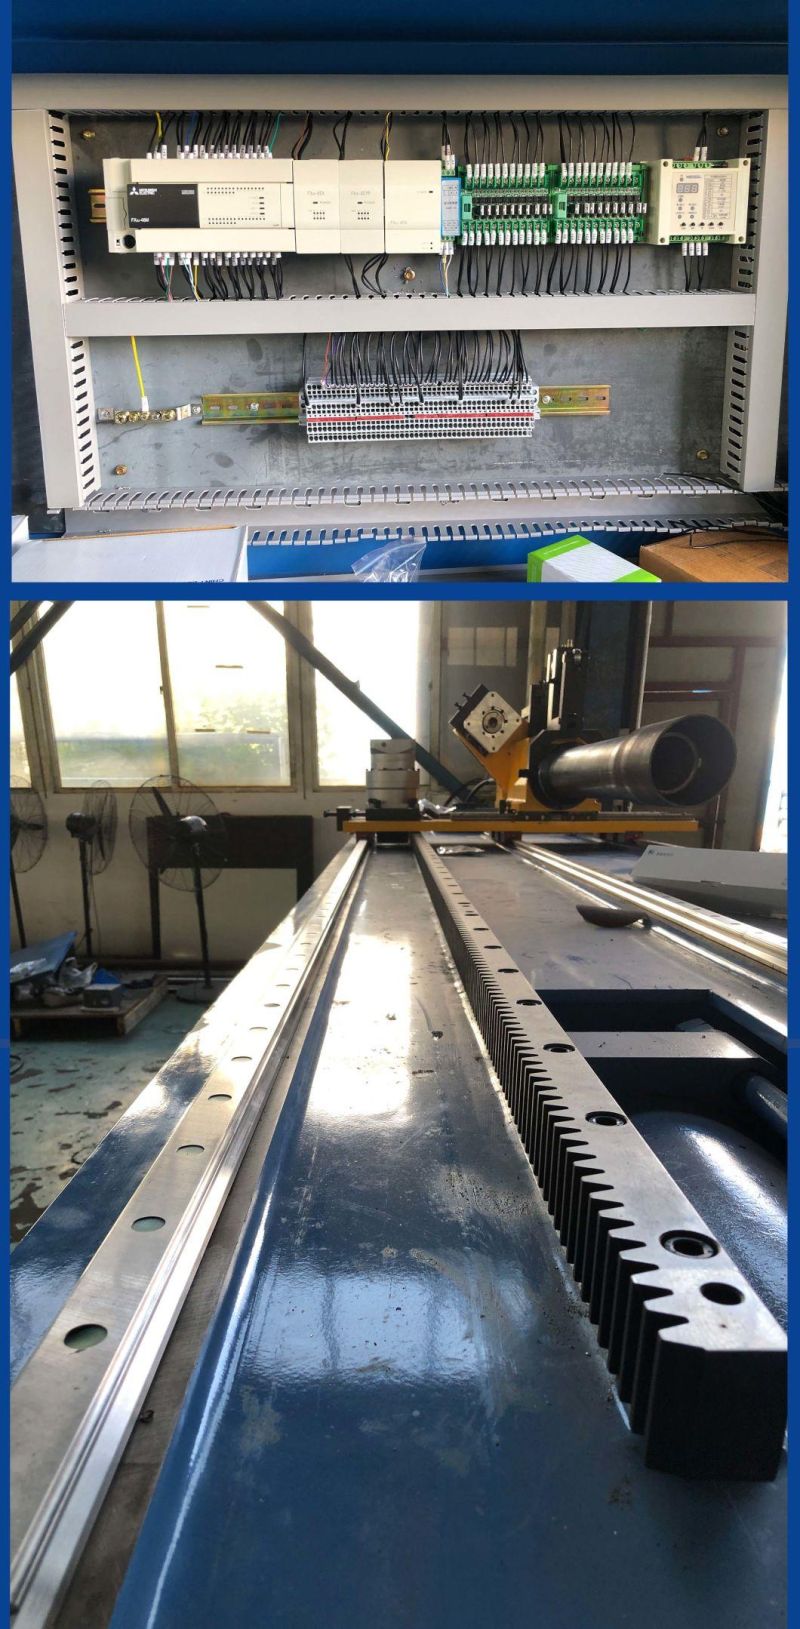 Customized Long Working Life Rt-114CNC Metal Bender Machine with Imported Acc